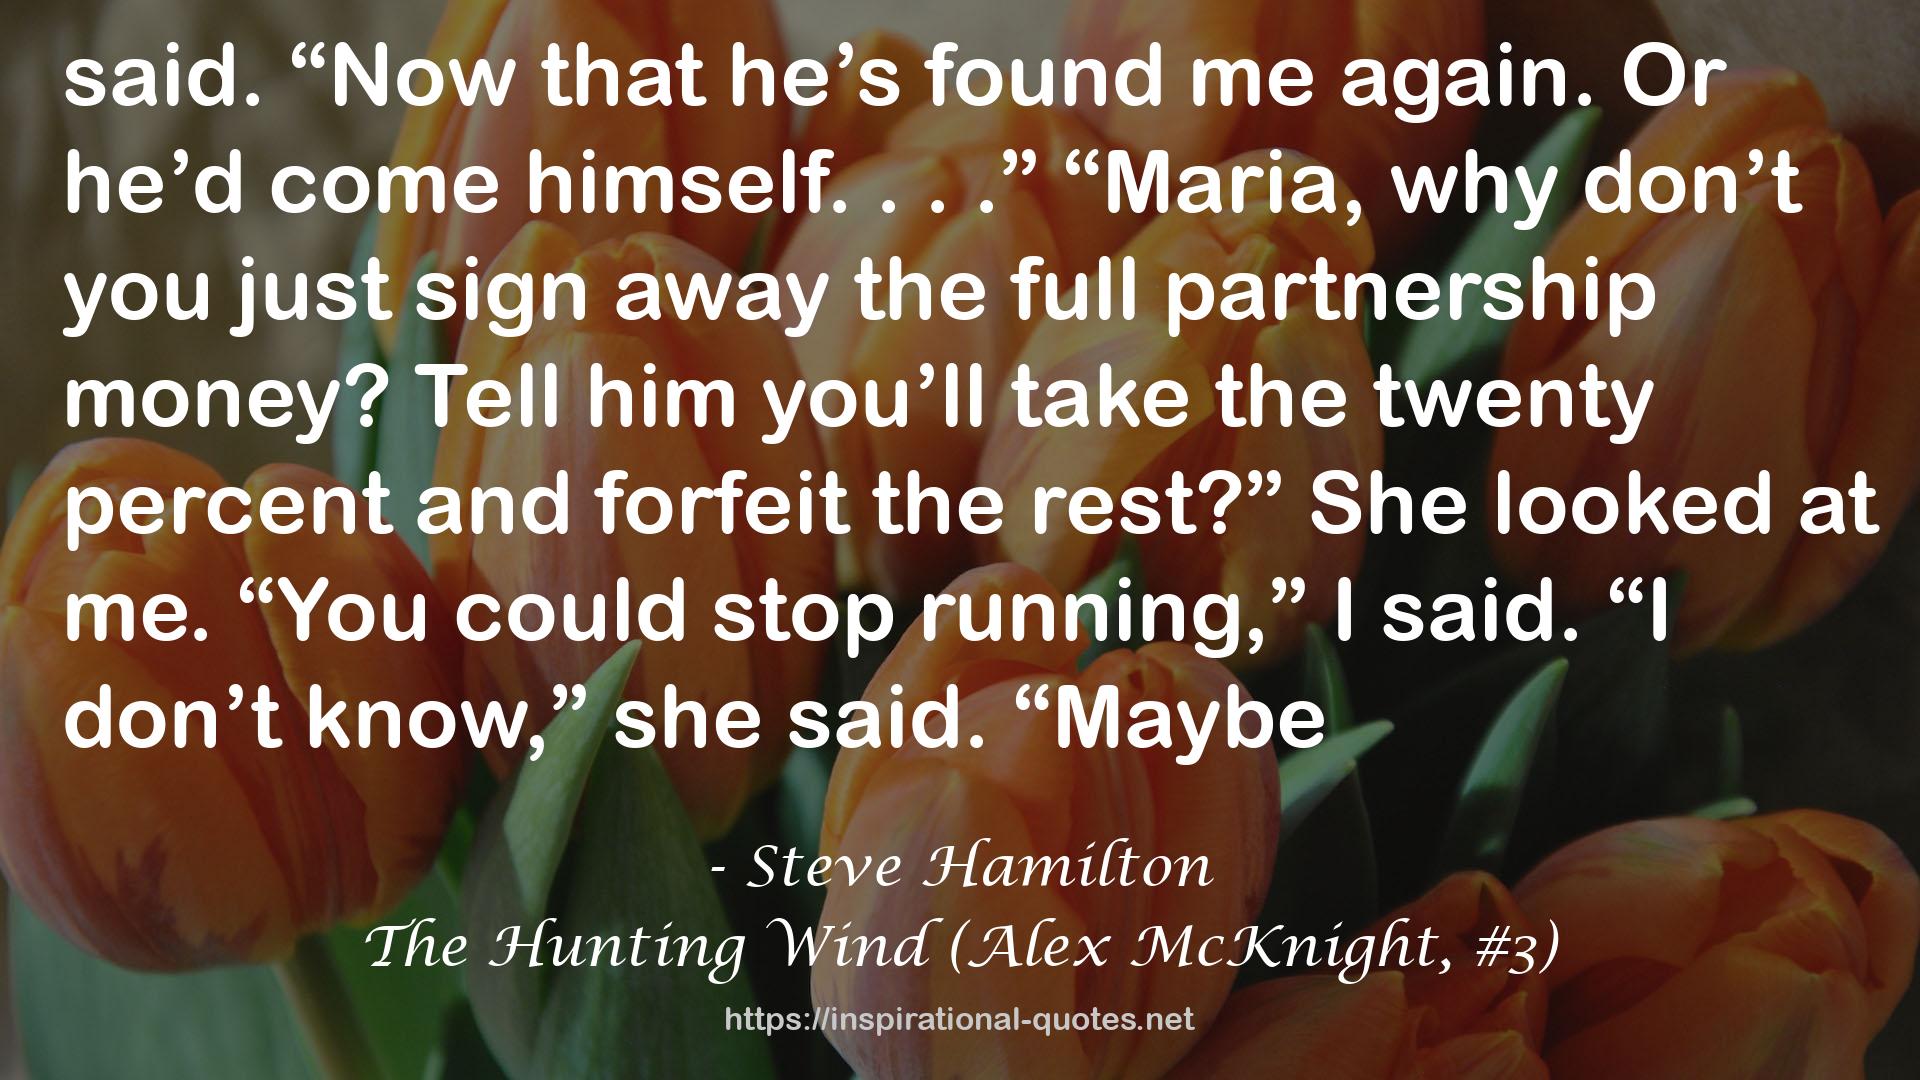 The Hunting Wind (Alex McKnight, #3) QUOTES